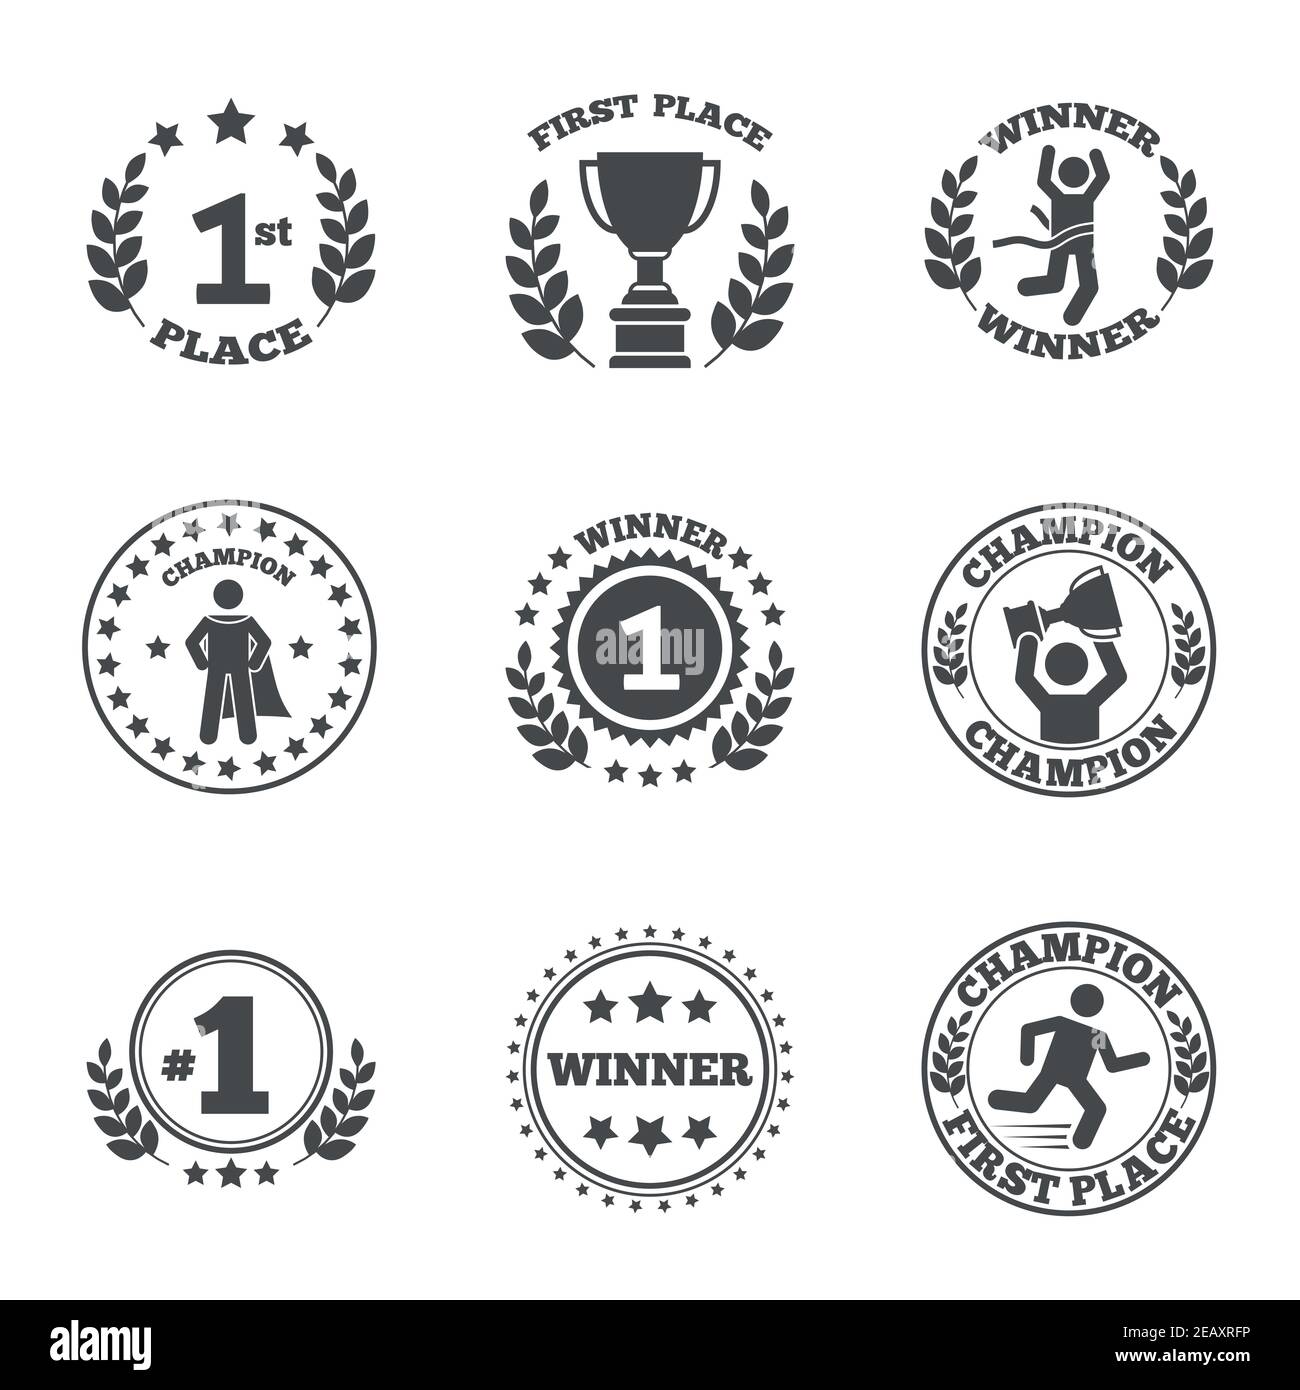 First place emblem and winner ribbons labels set vector illustration Stock Vector